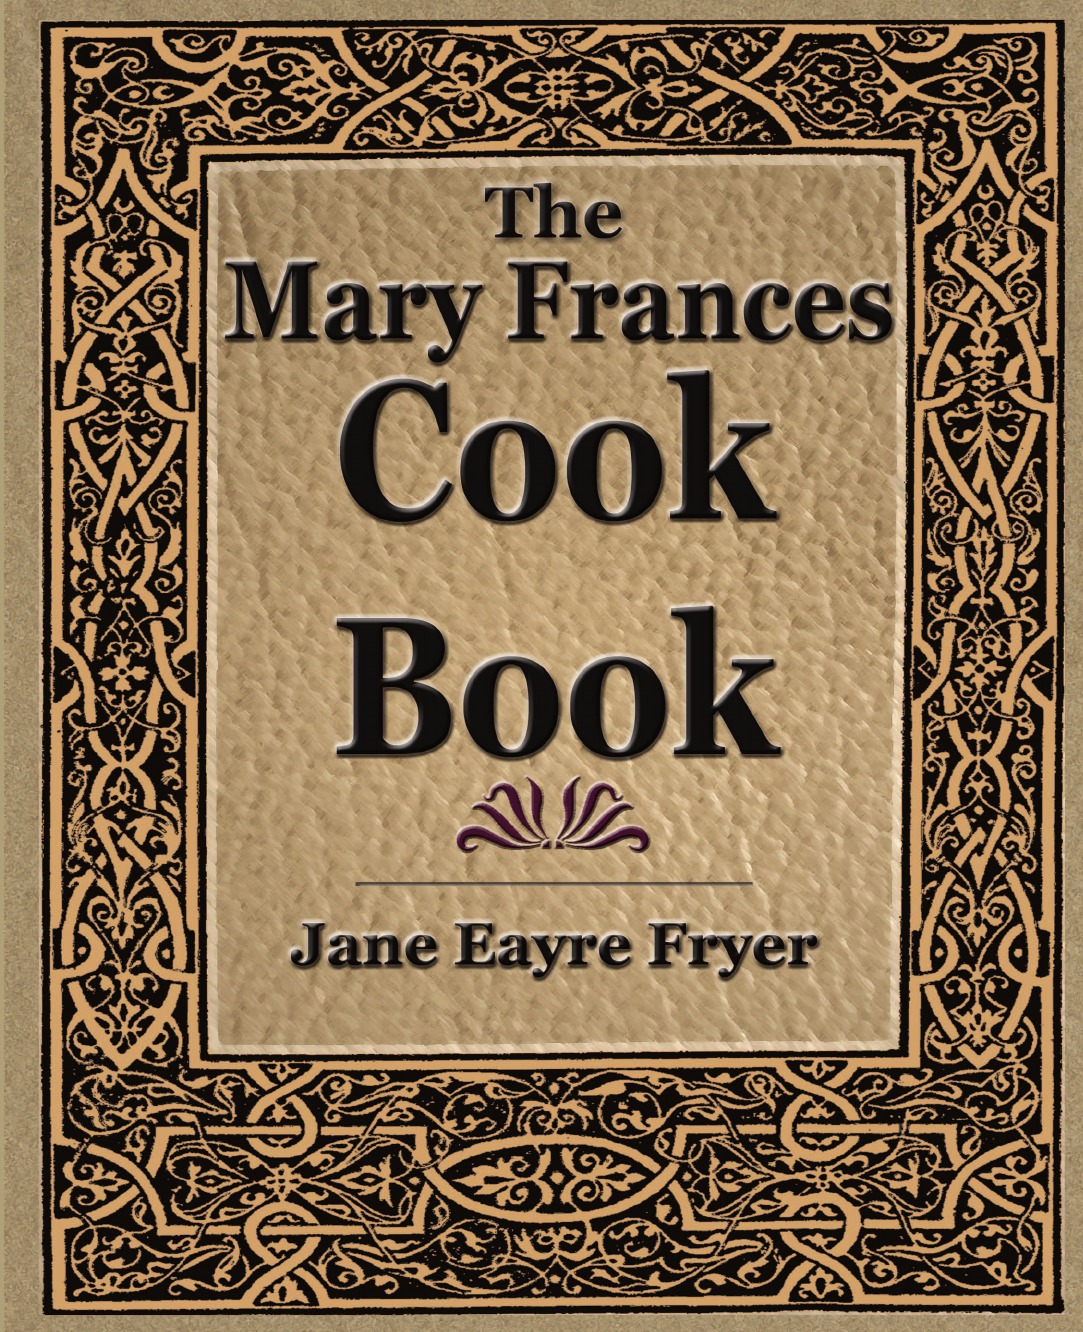 Jane Eayre Fryer The Mary Frances Cook Book (1912)